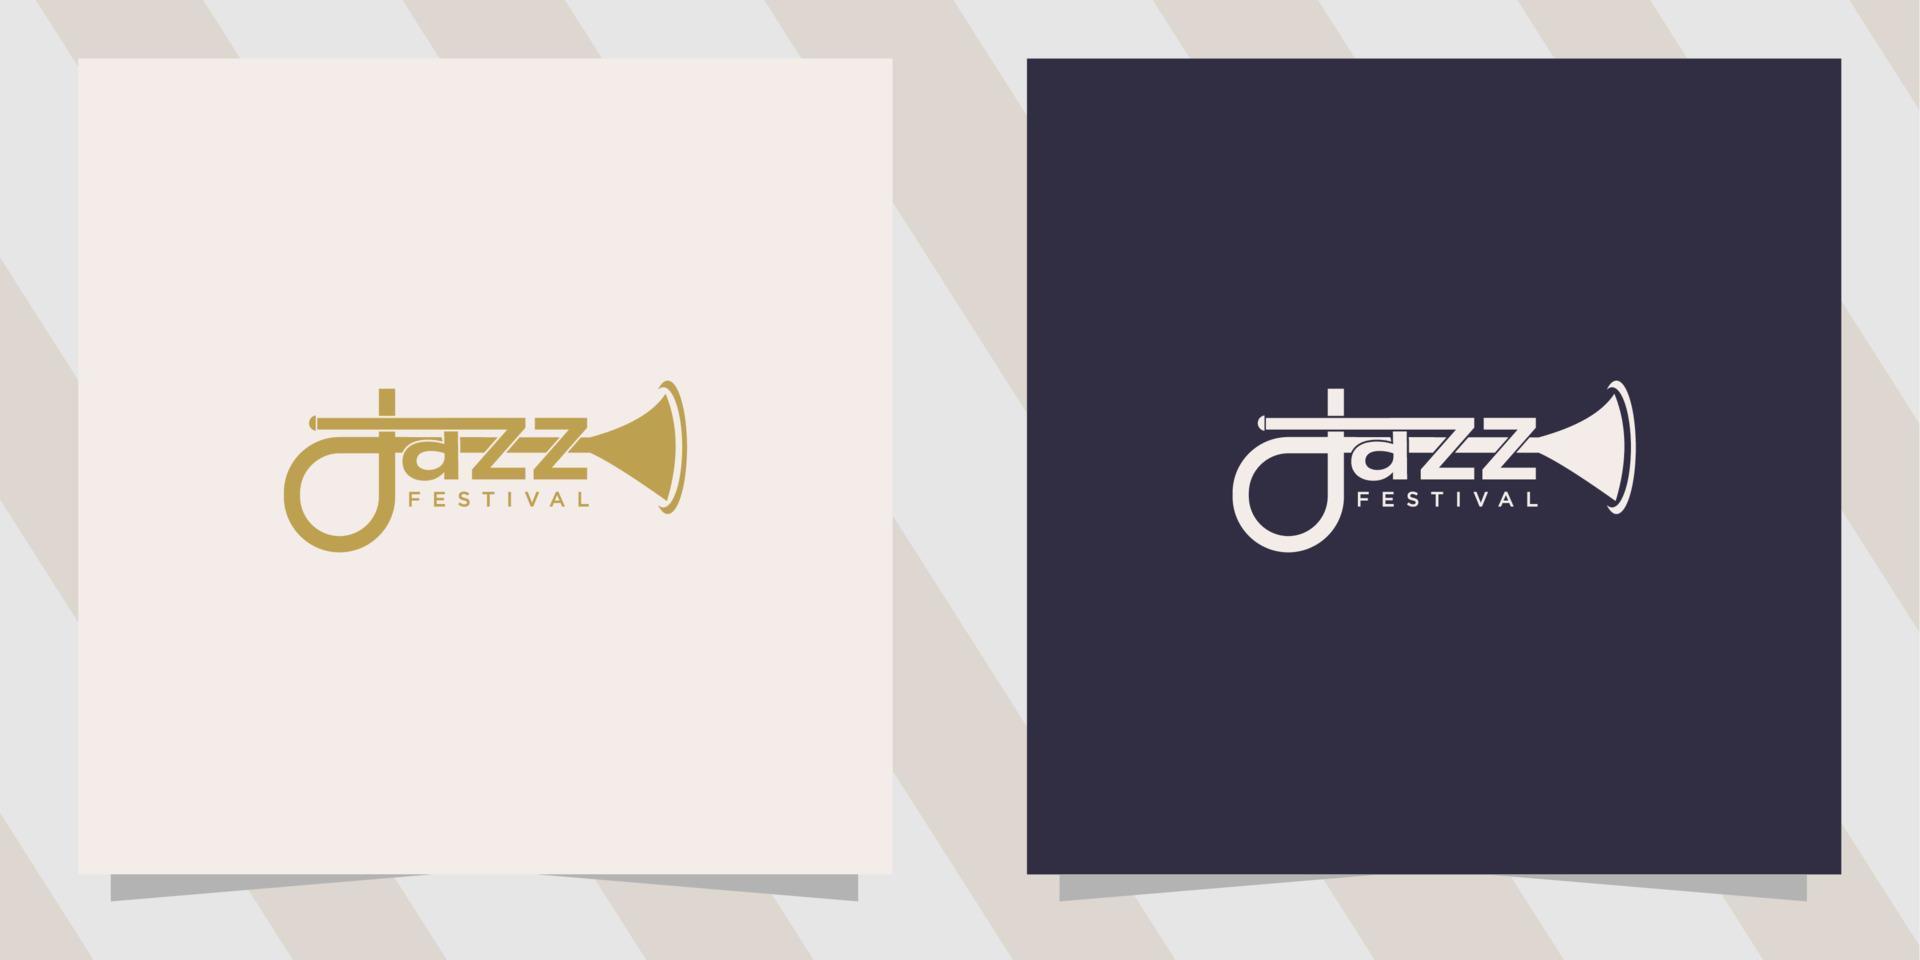 saxophone with jazz festival logo template vector